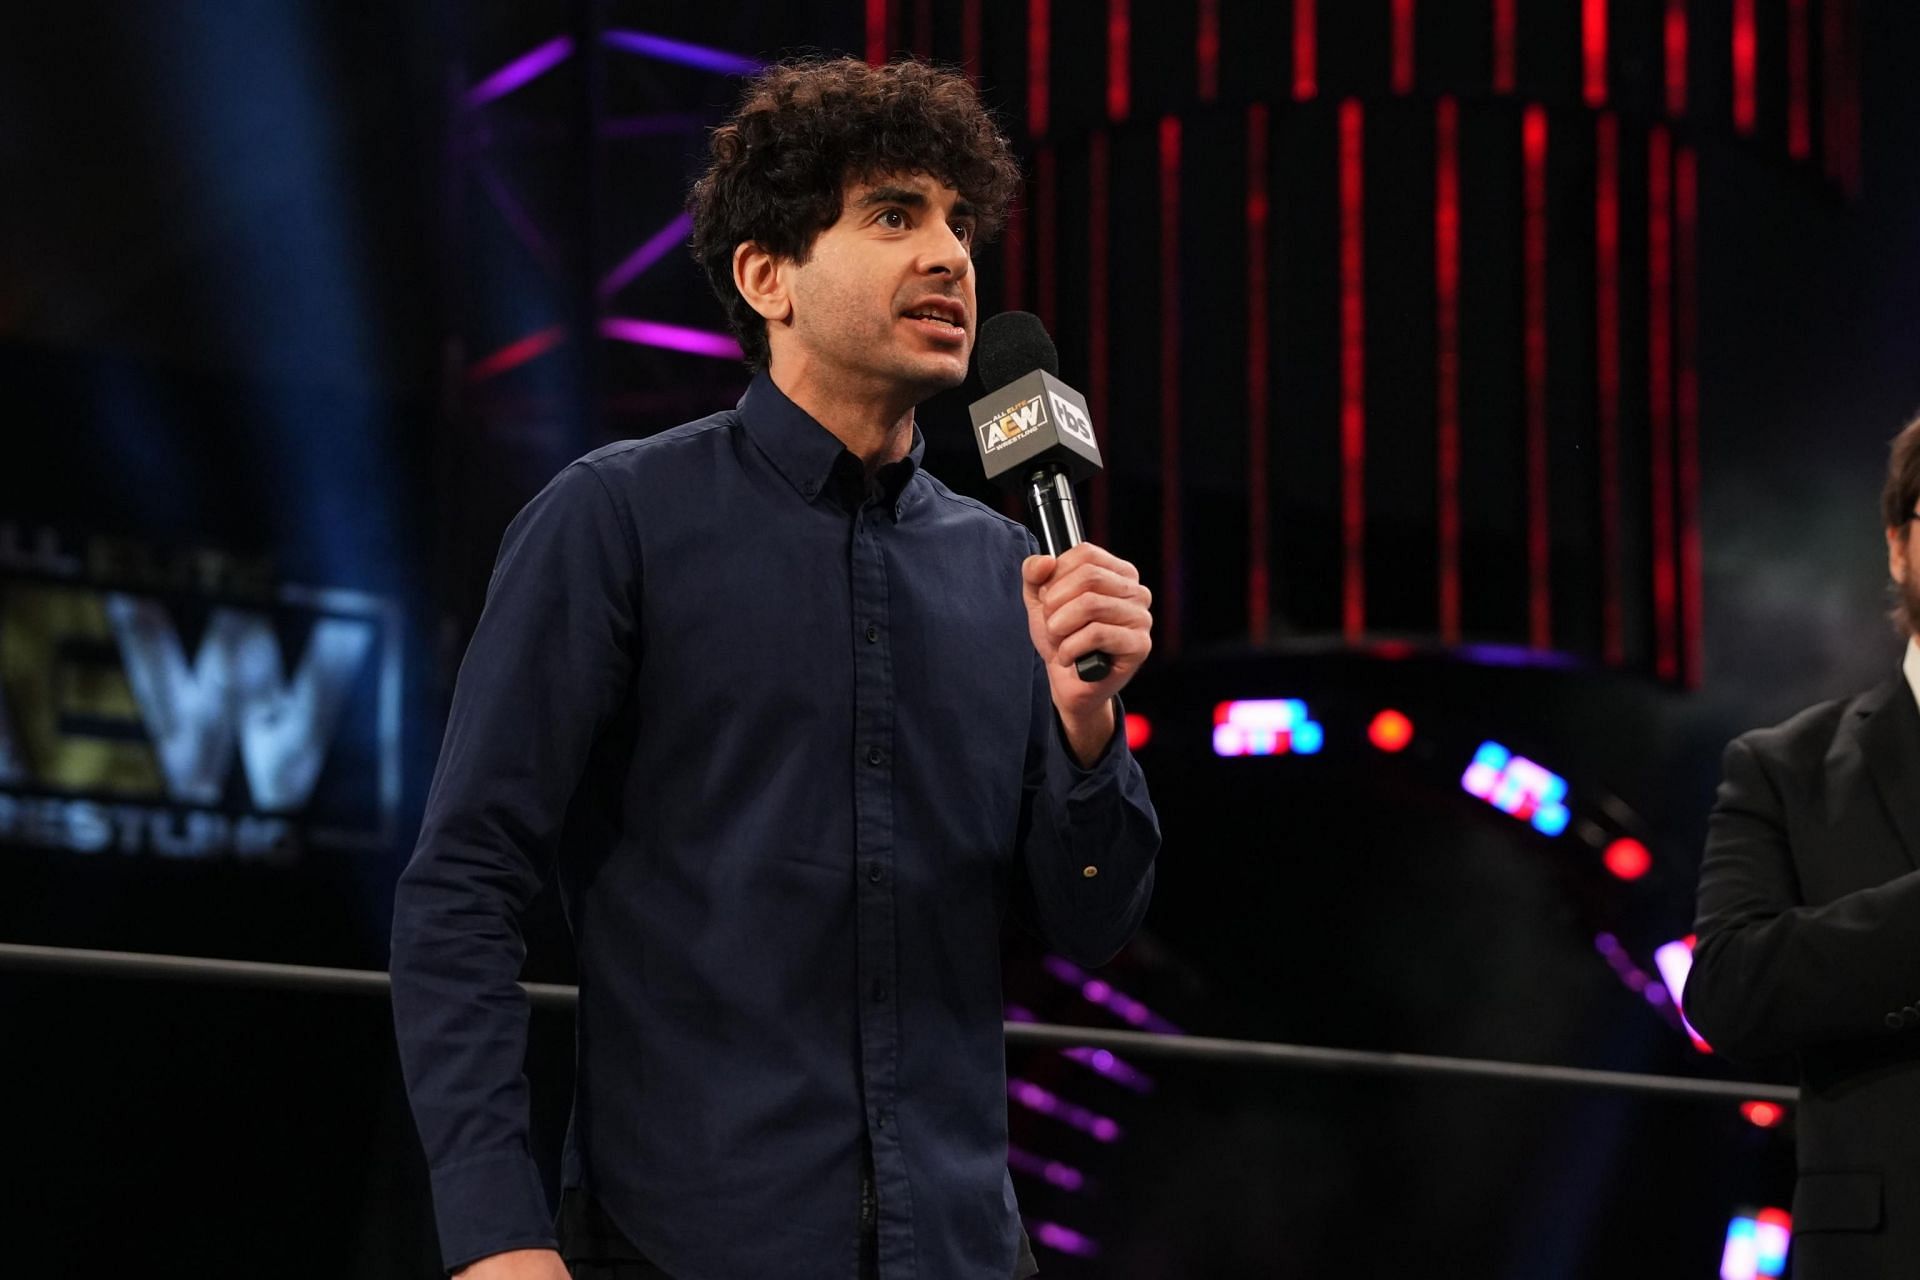 AEW President Tony Khan is one of the most powerful men in wrestling today.